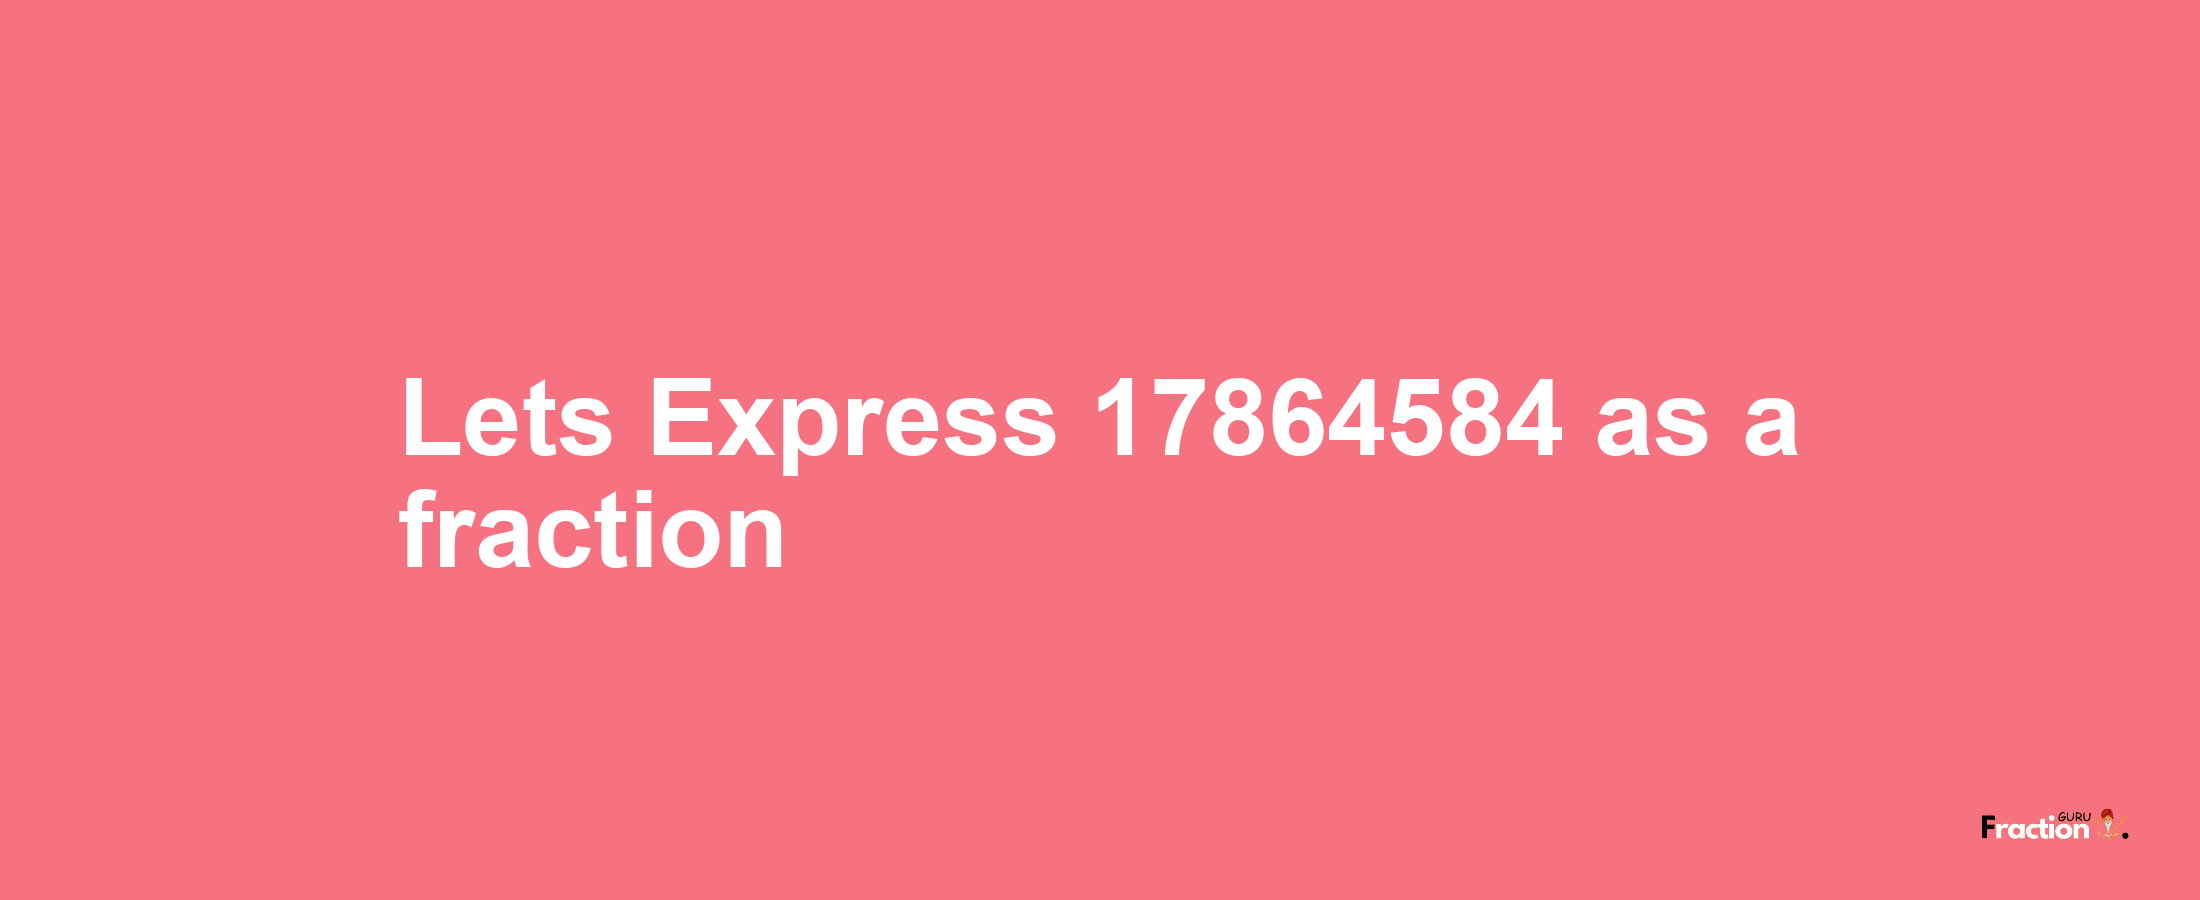 Lets Express 17864584 as afraction